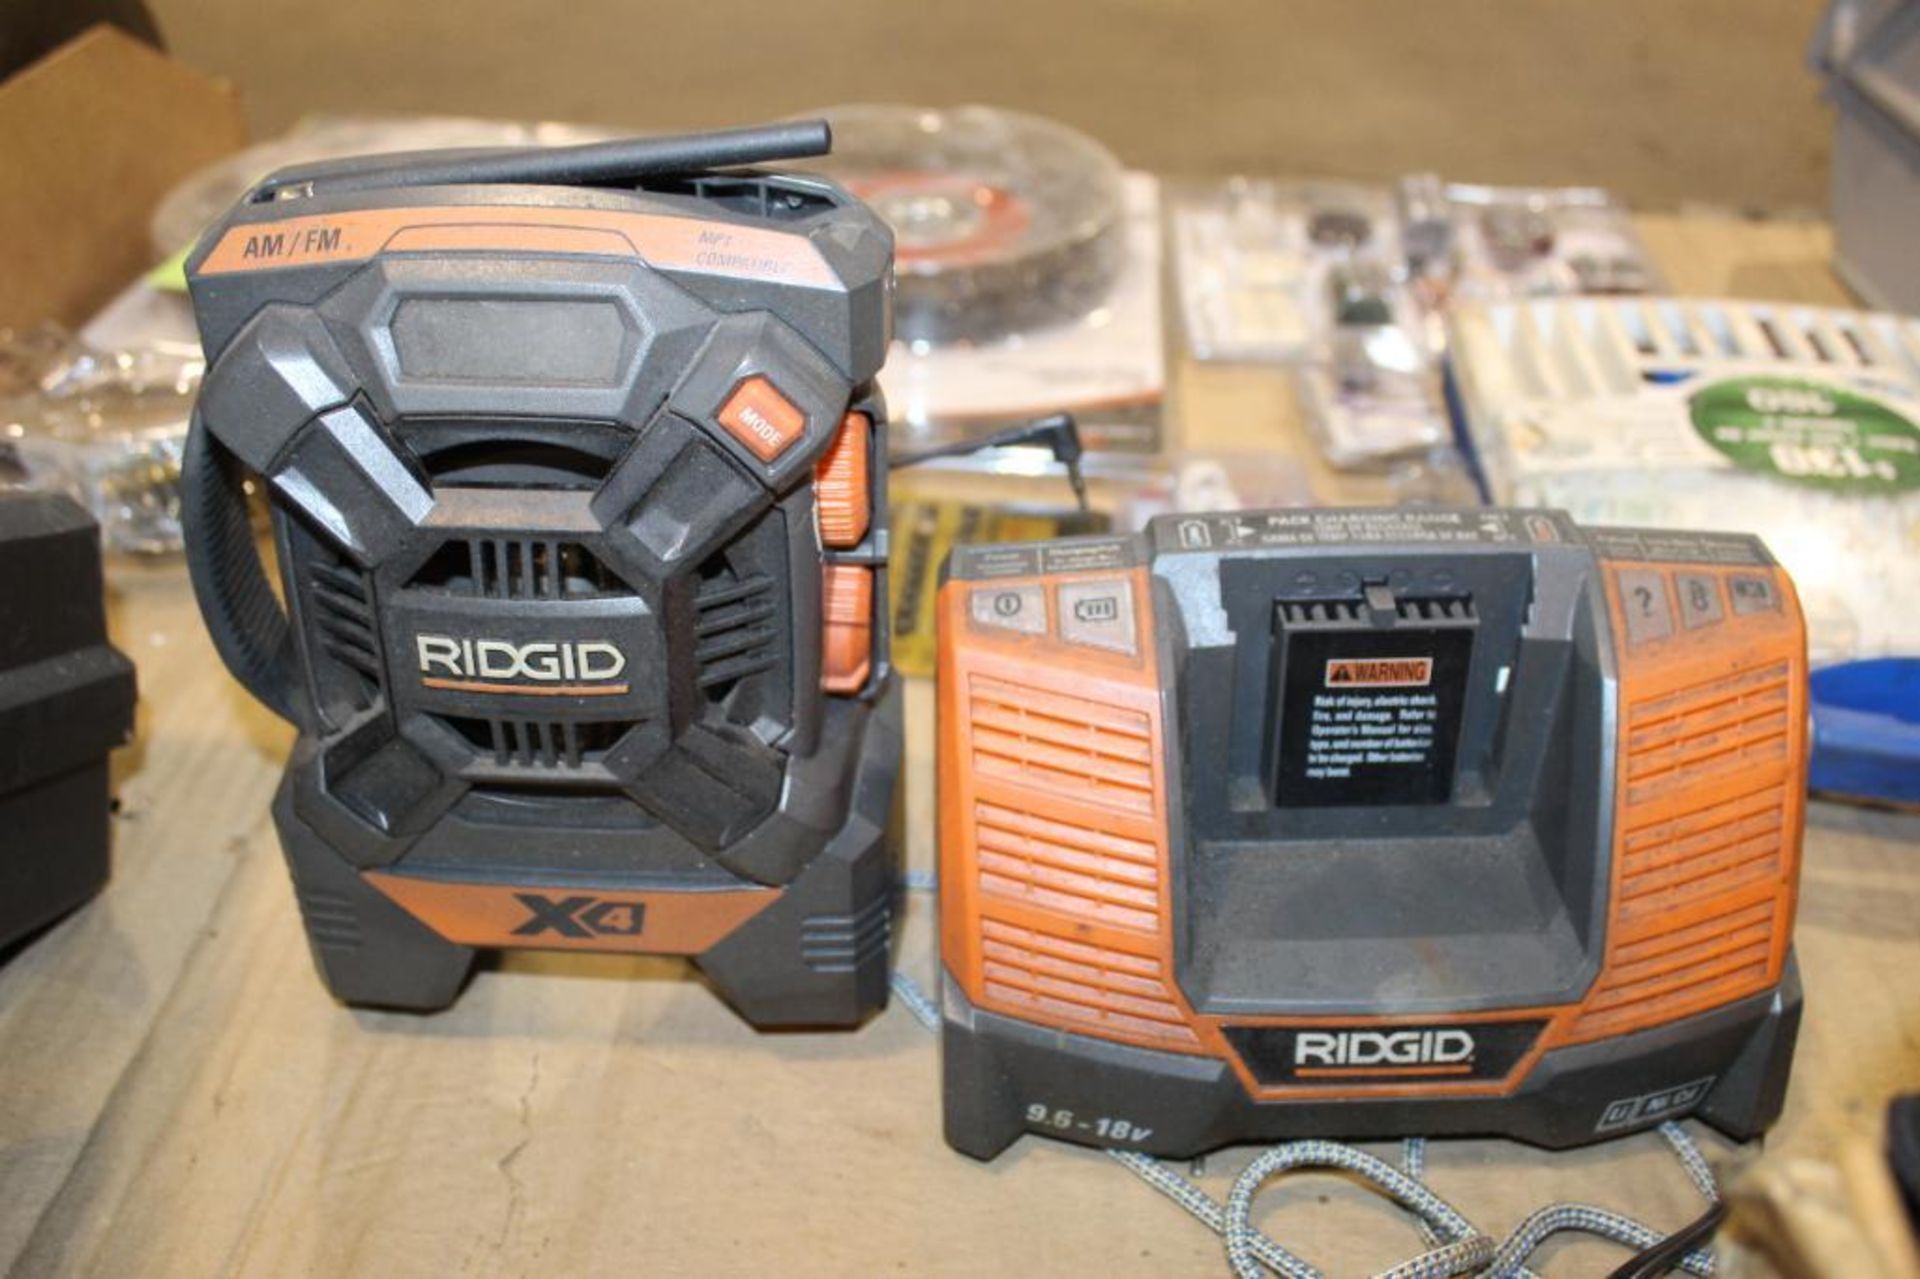 Lot of Ridgid Canvas Bags/Assorted Tool Holders, DeWalt Hardcase with (2) Battery Chargers, Ridgid A - Image 6 of 13